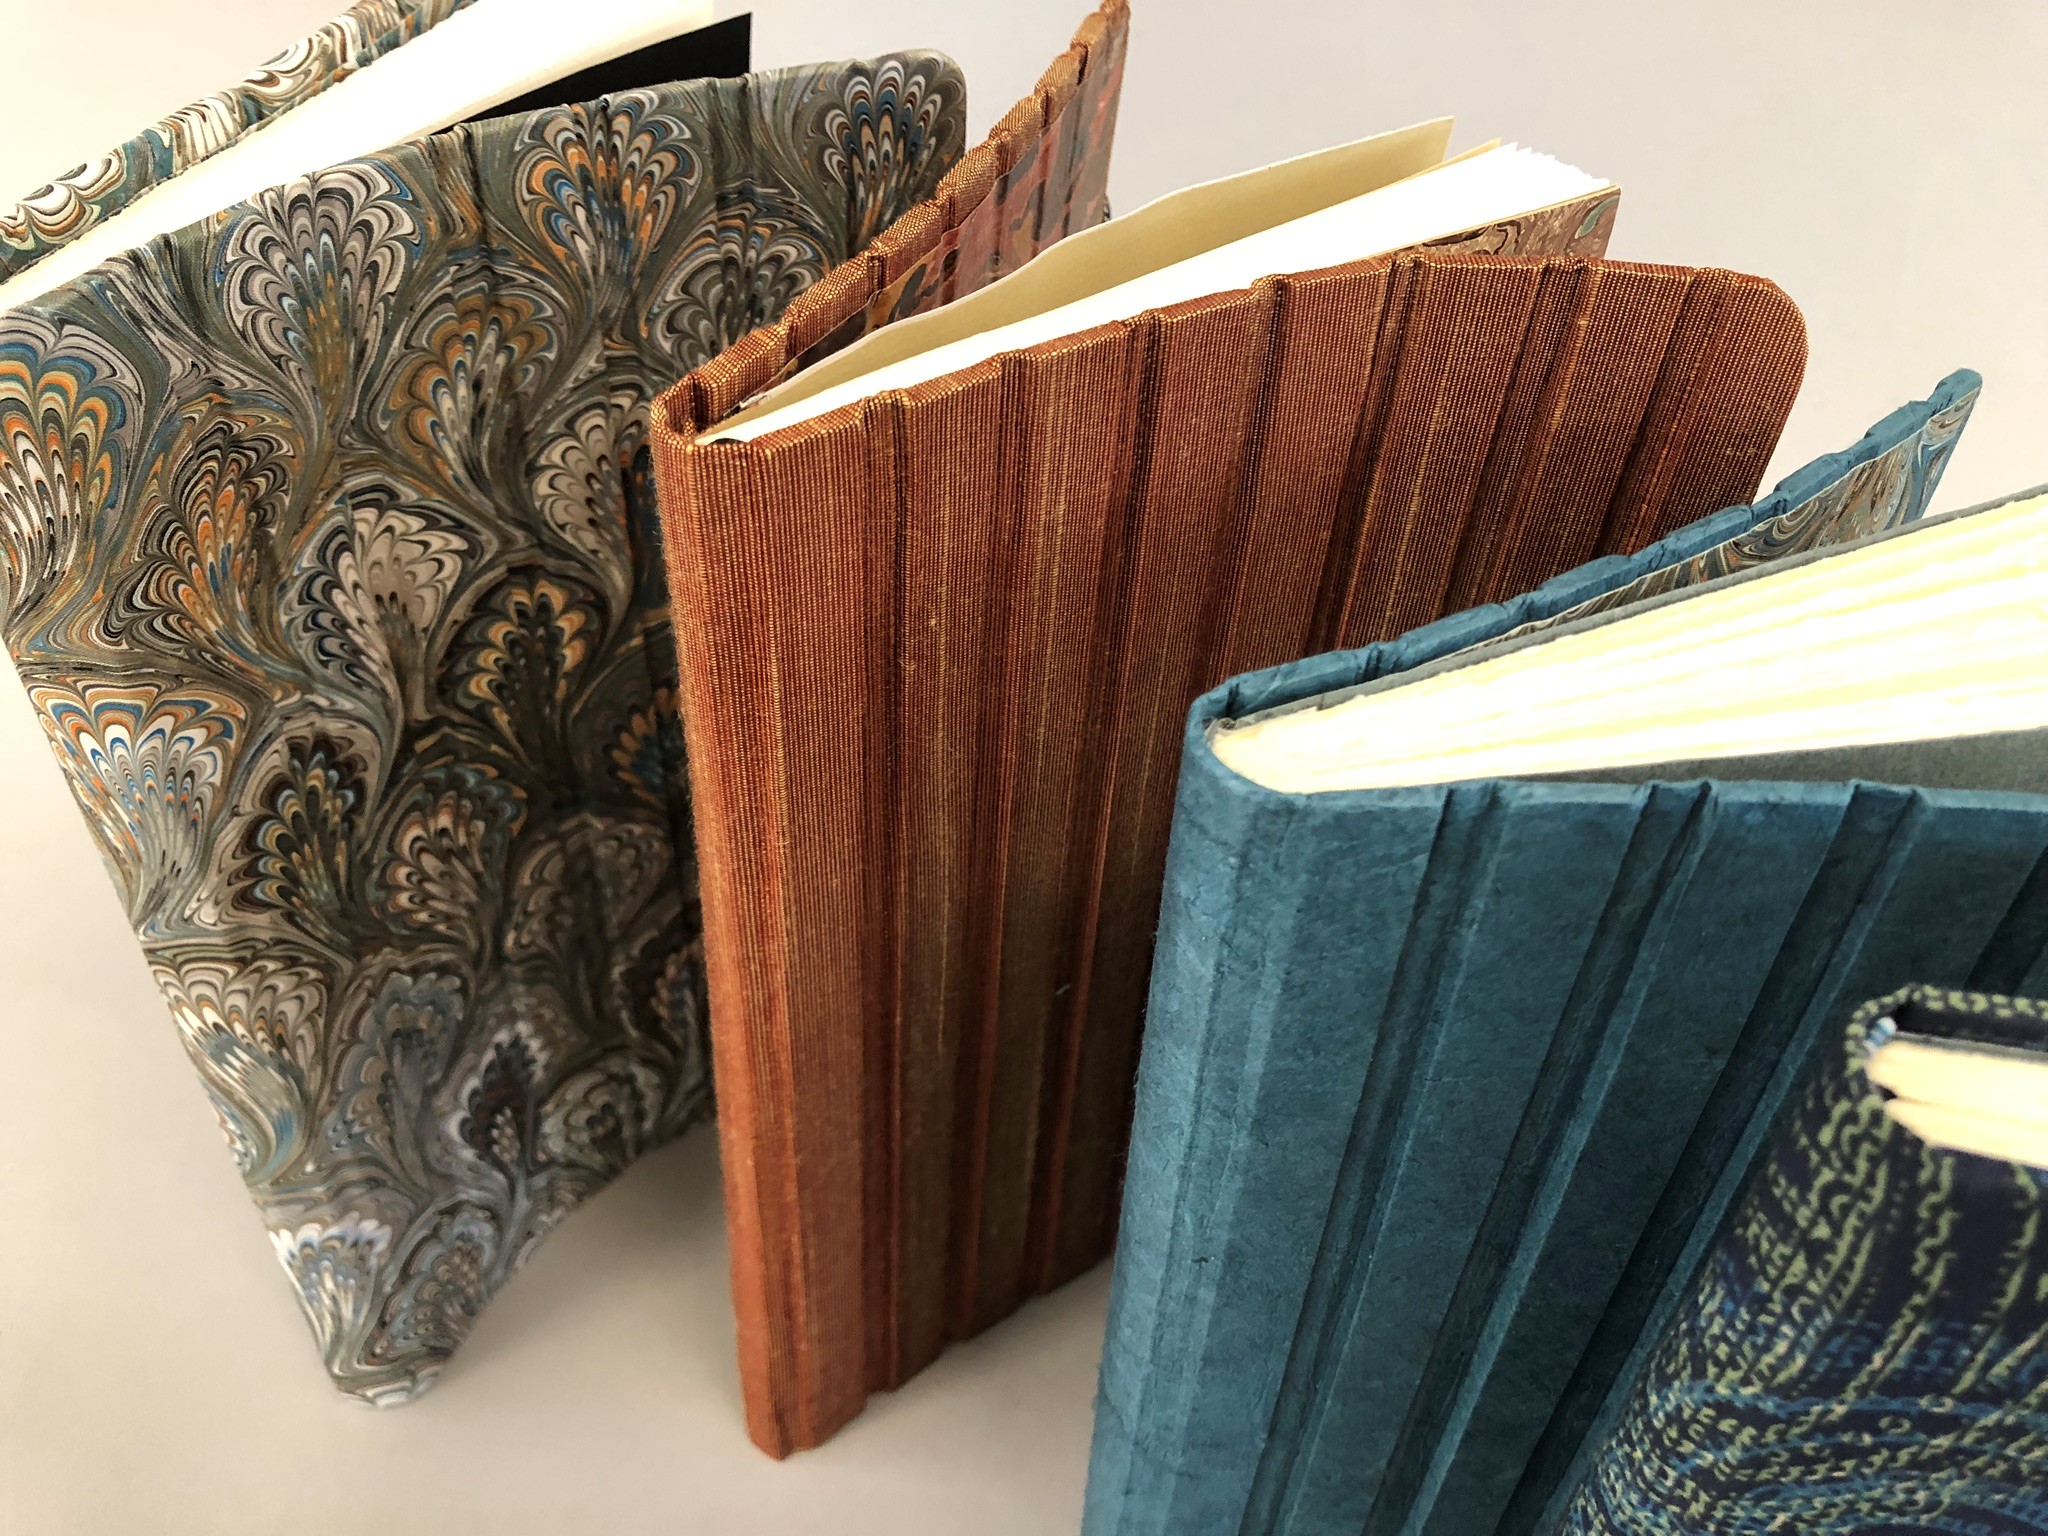 Photograph of the artists Articulated binding books